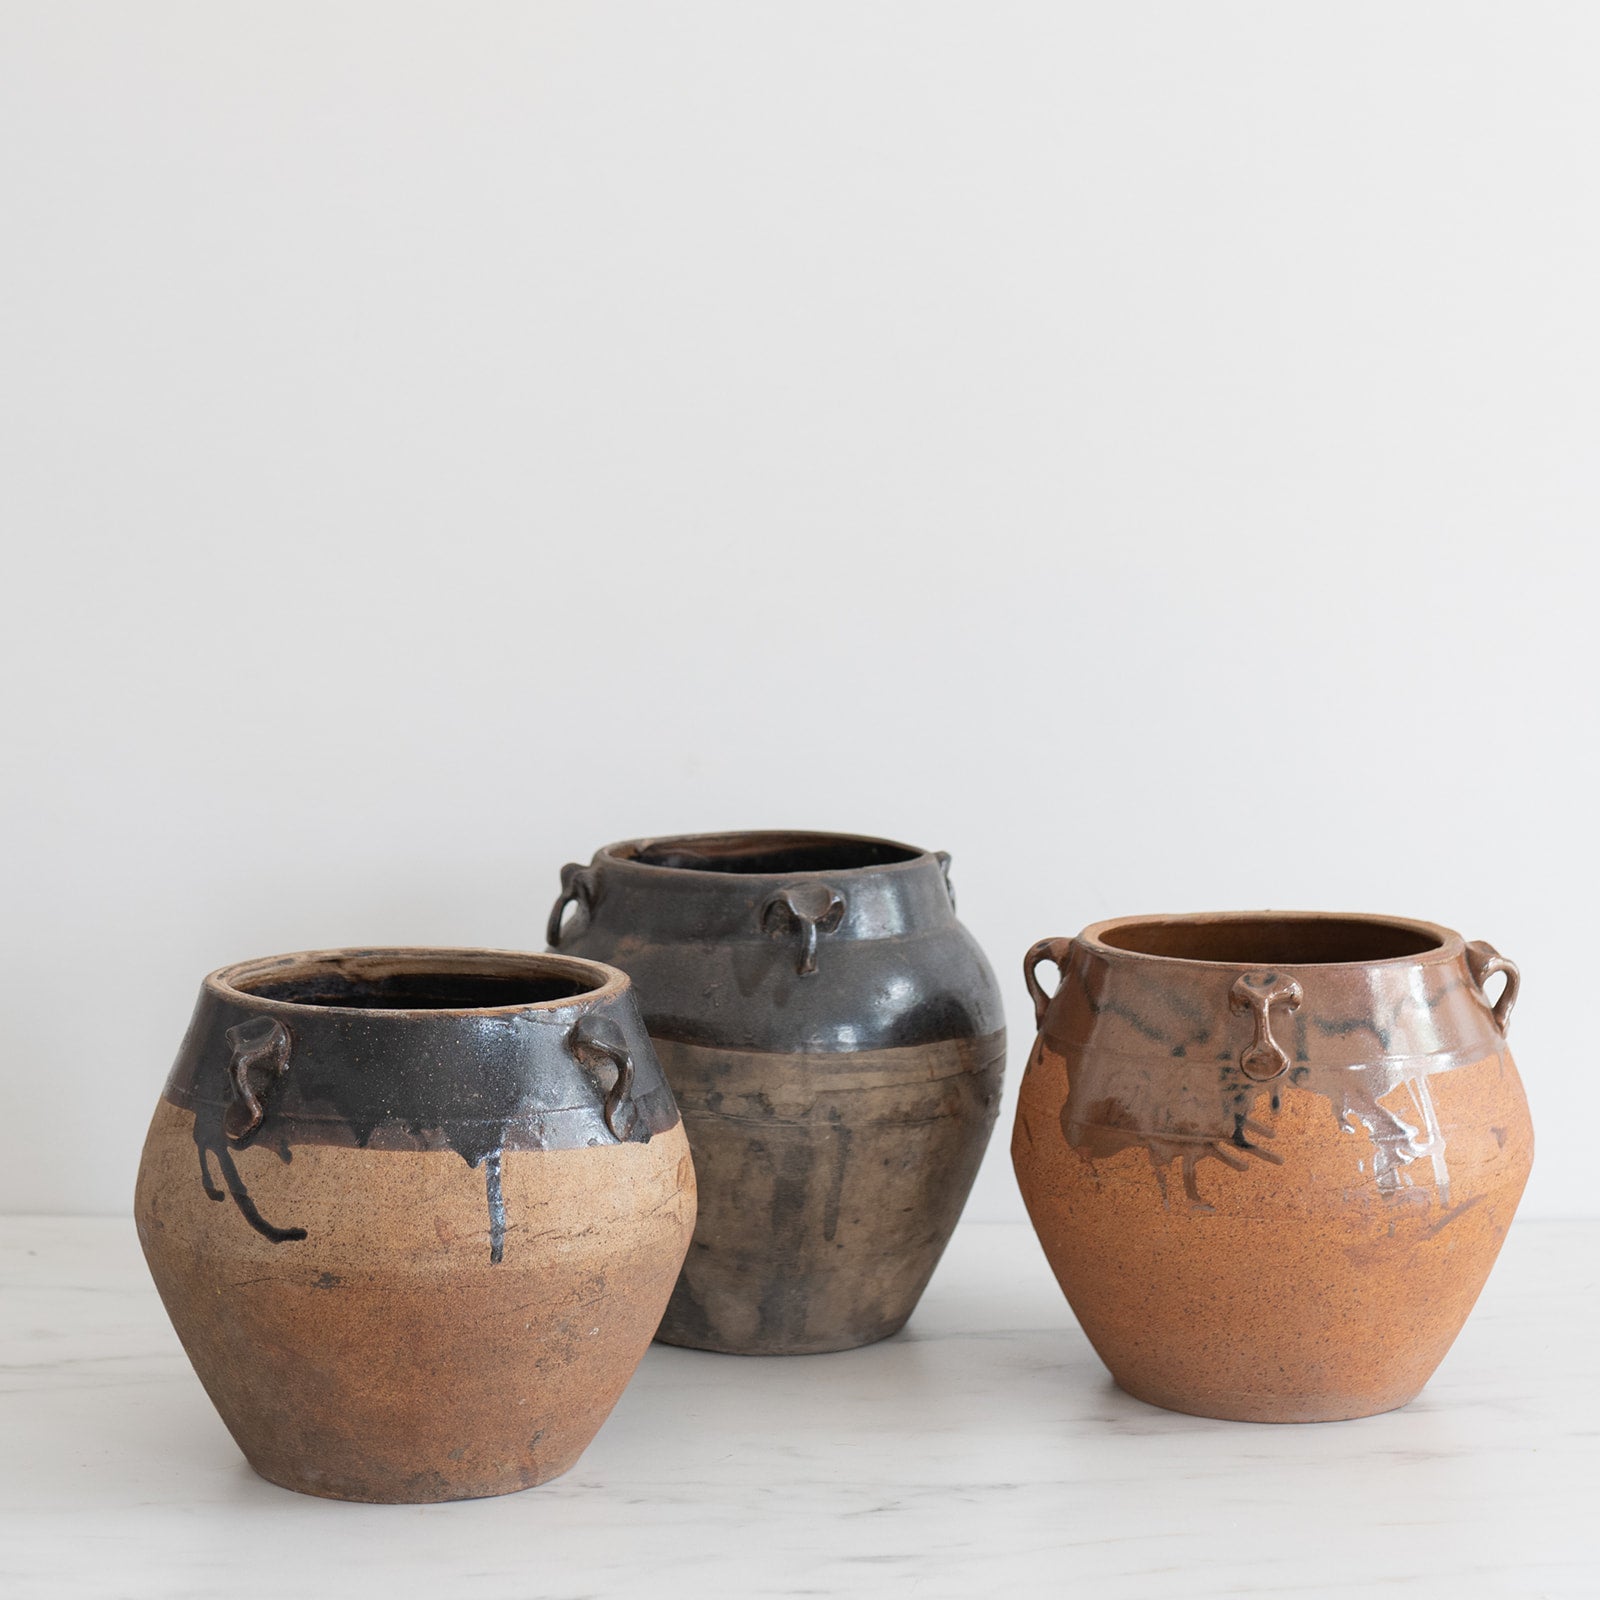 Rustic Partial Glazed Pots with Ears